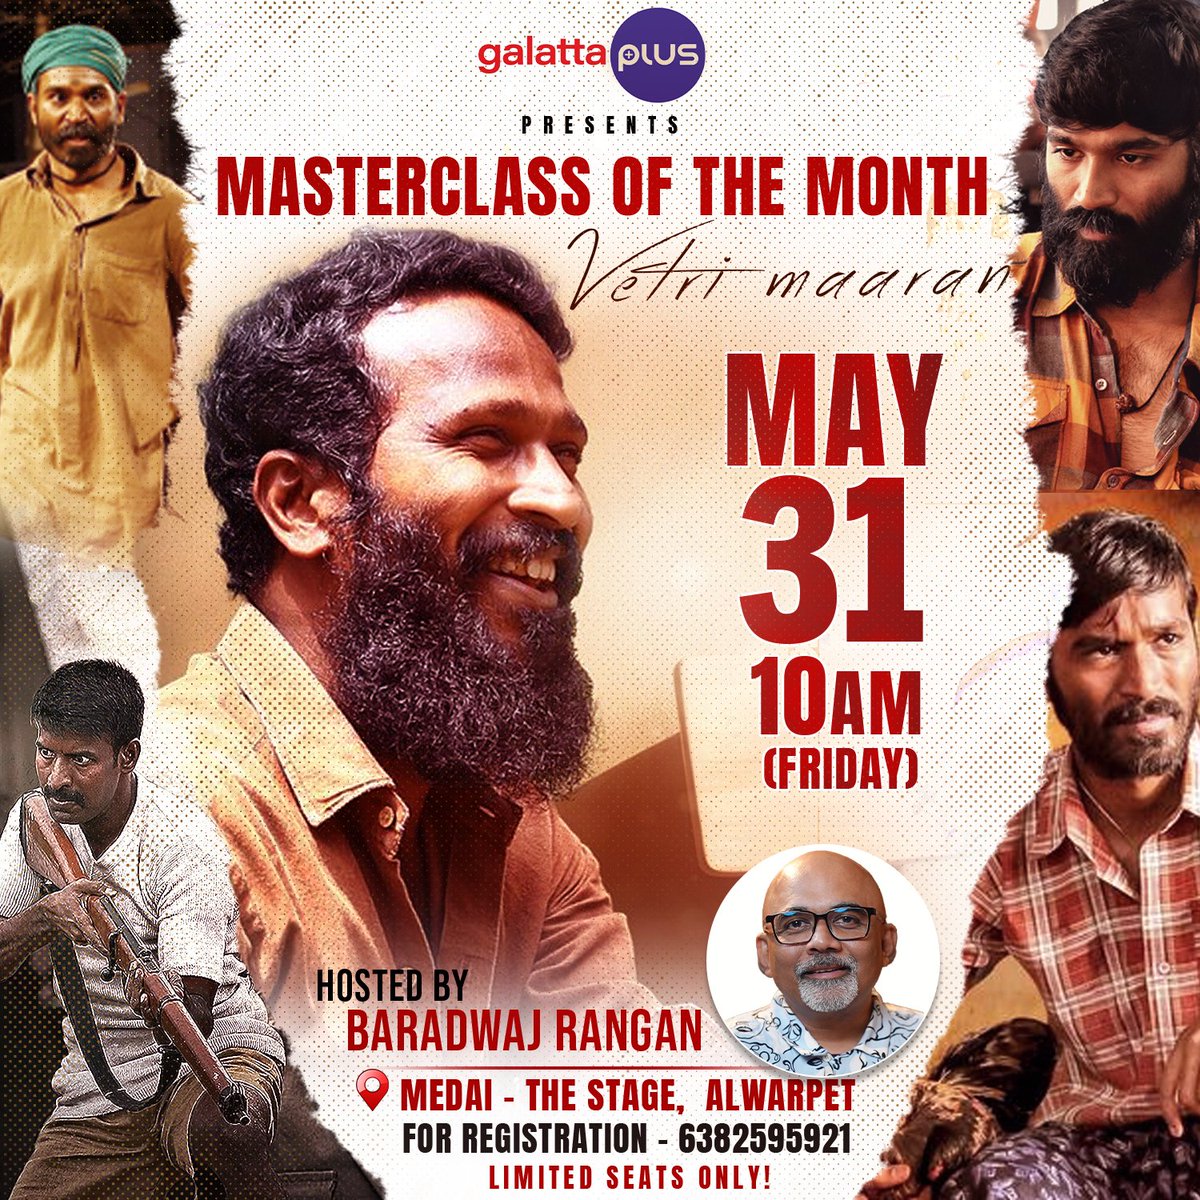 The Man With The Midas Touch, Director Vetrimaaran is all set to kick off our Masterclass series this Friday, May 31. Register now to be part of our live interactive event. Limited seats only!🎟 📱+91 6382595921 @baradwajrangan #Vetrimaaran #MasterClass #GalattaPlus